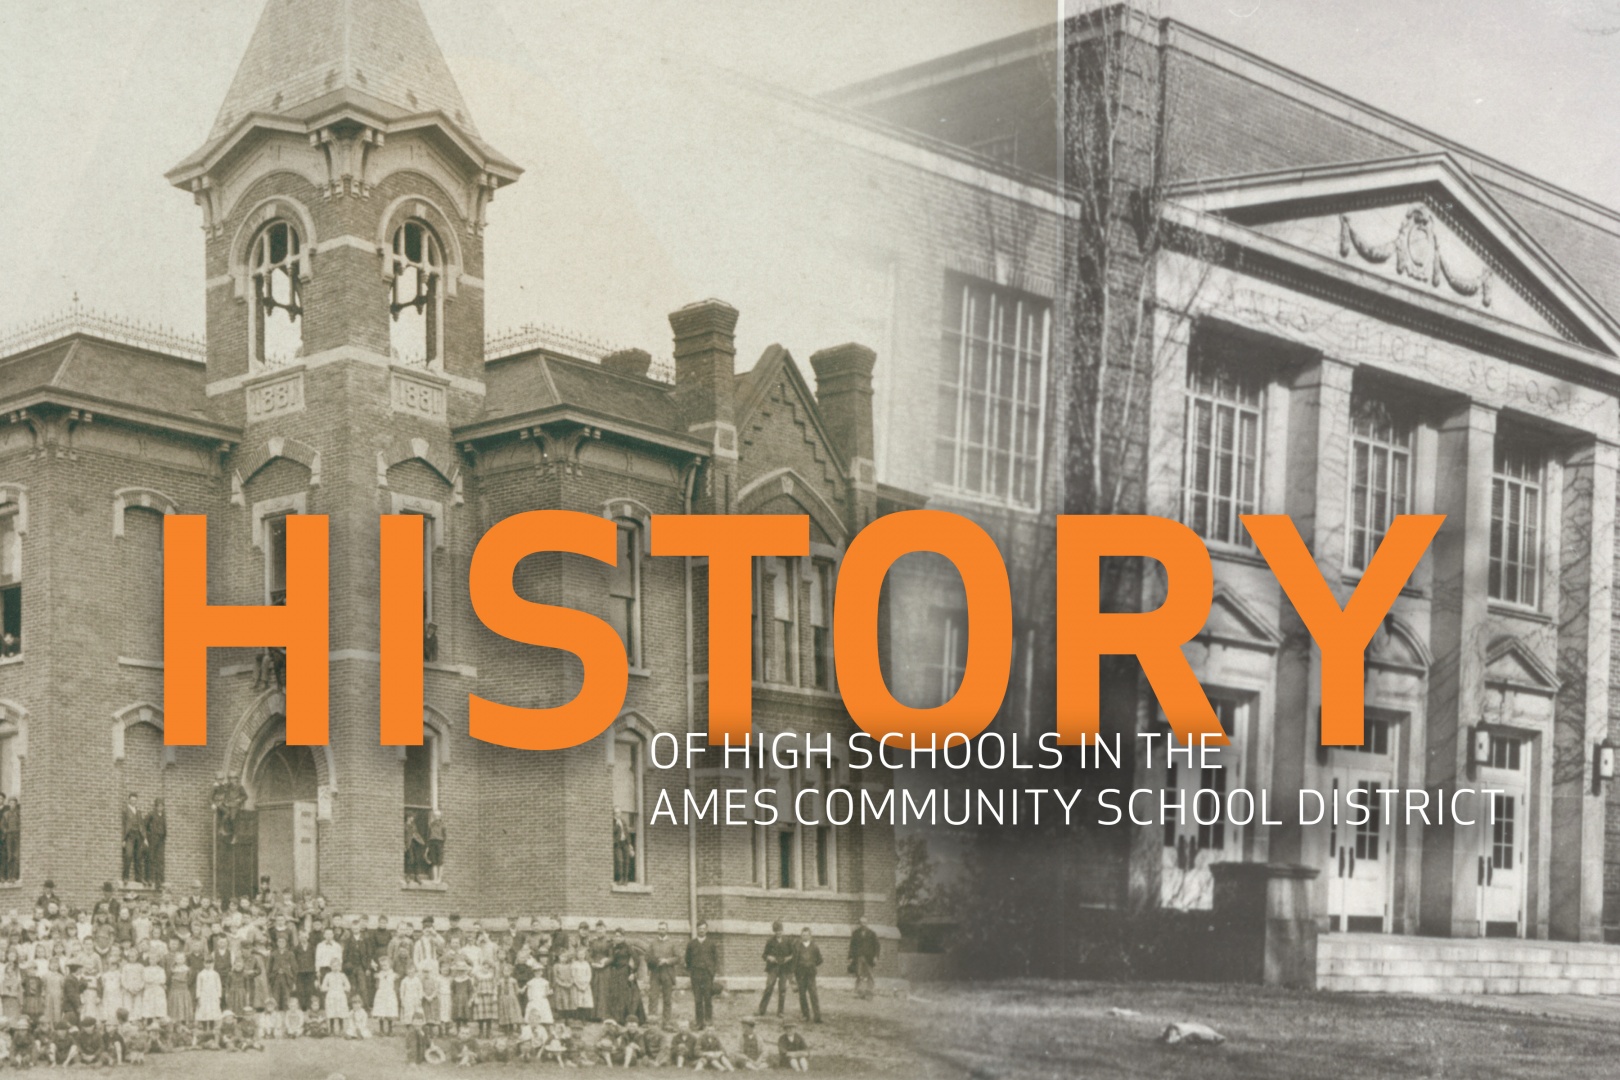 A Brief History of High Schools in the ACSD